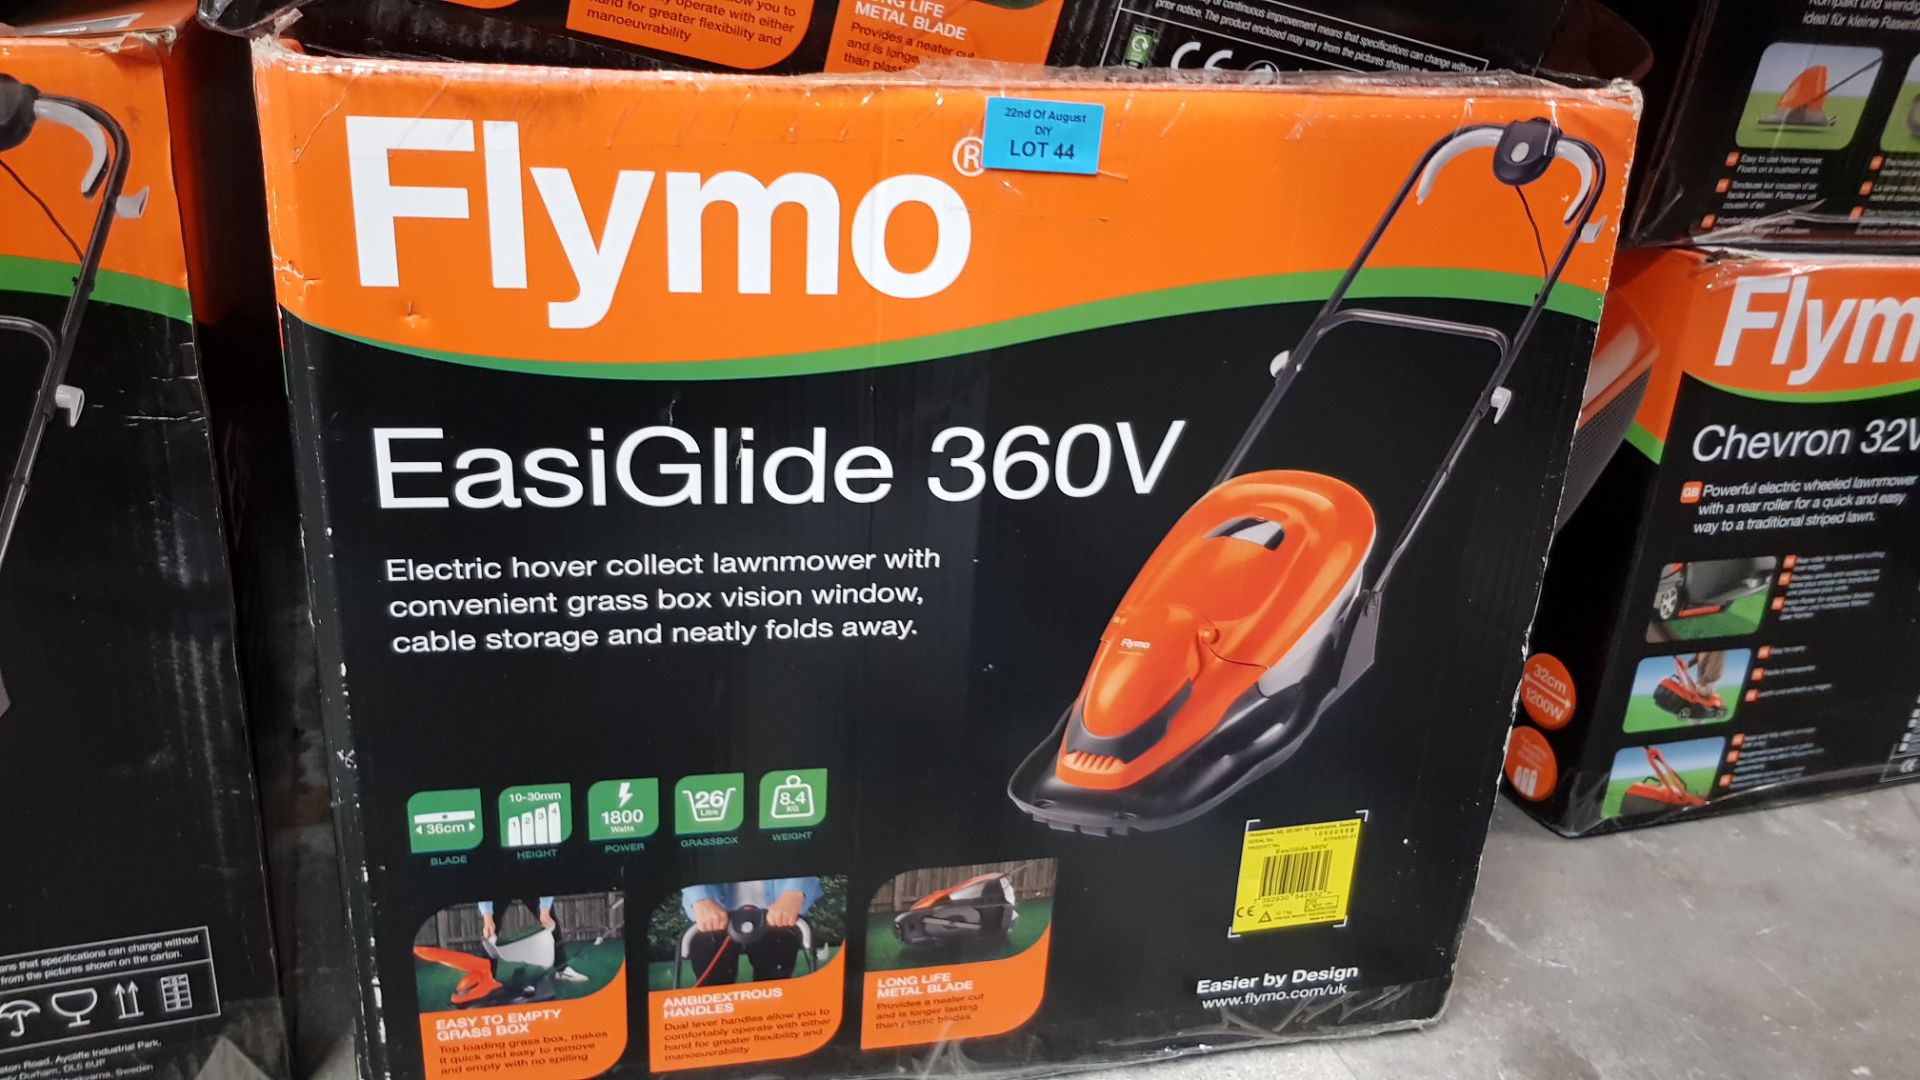 (R13C) 1x Flymo EasiGlide 360V Electric Hover Collect Lawnmower RRP £139. - Image 3 of 3